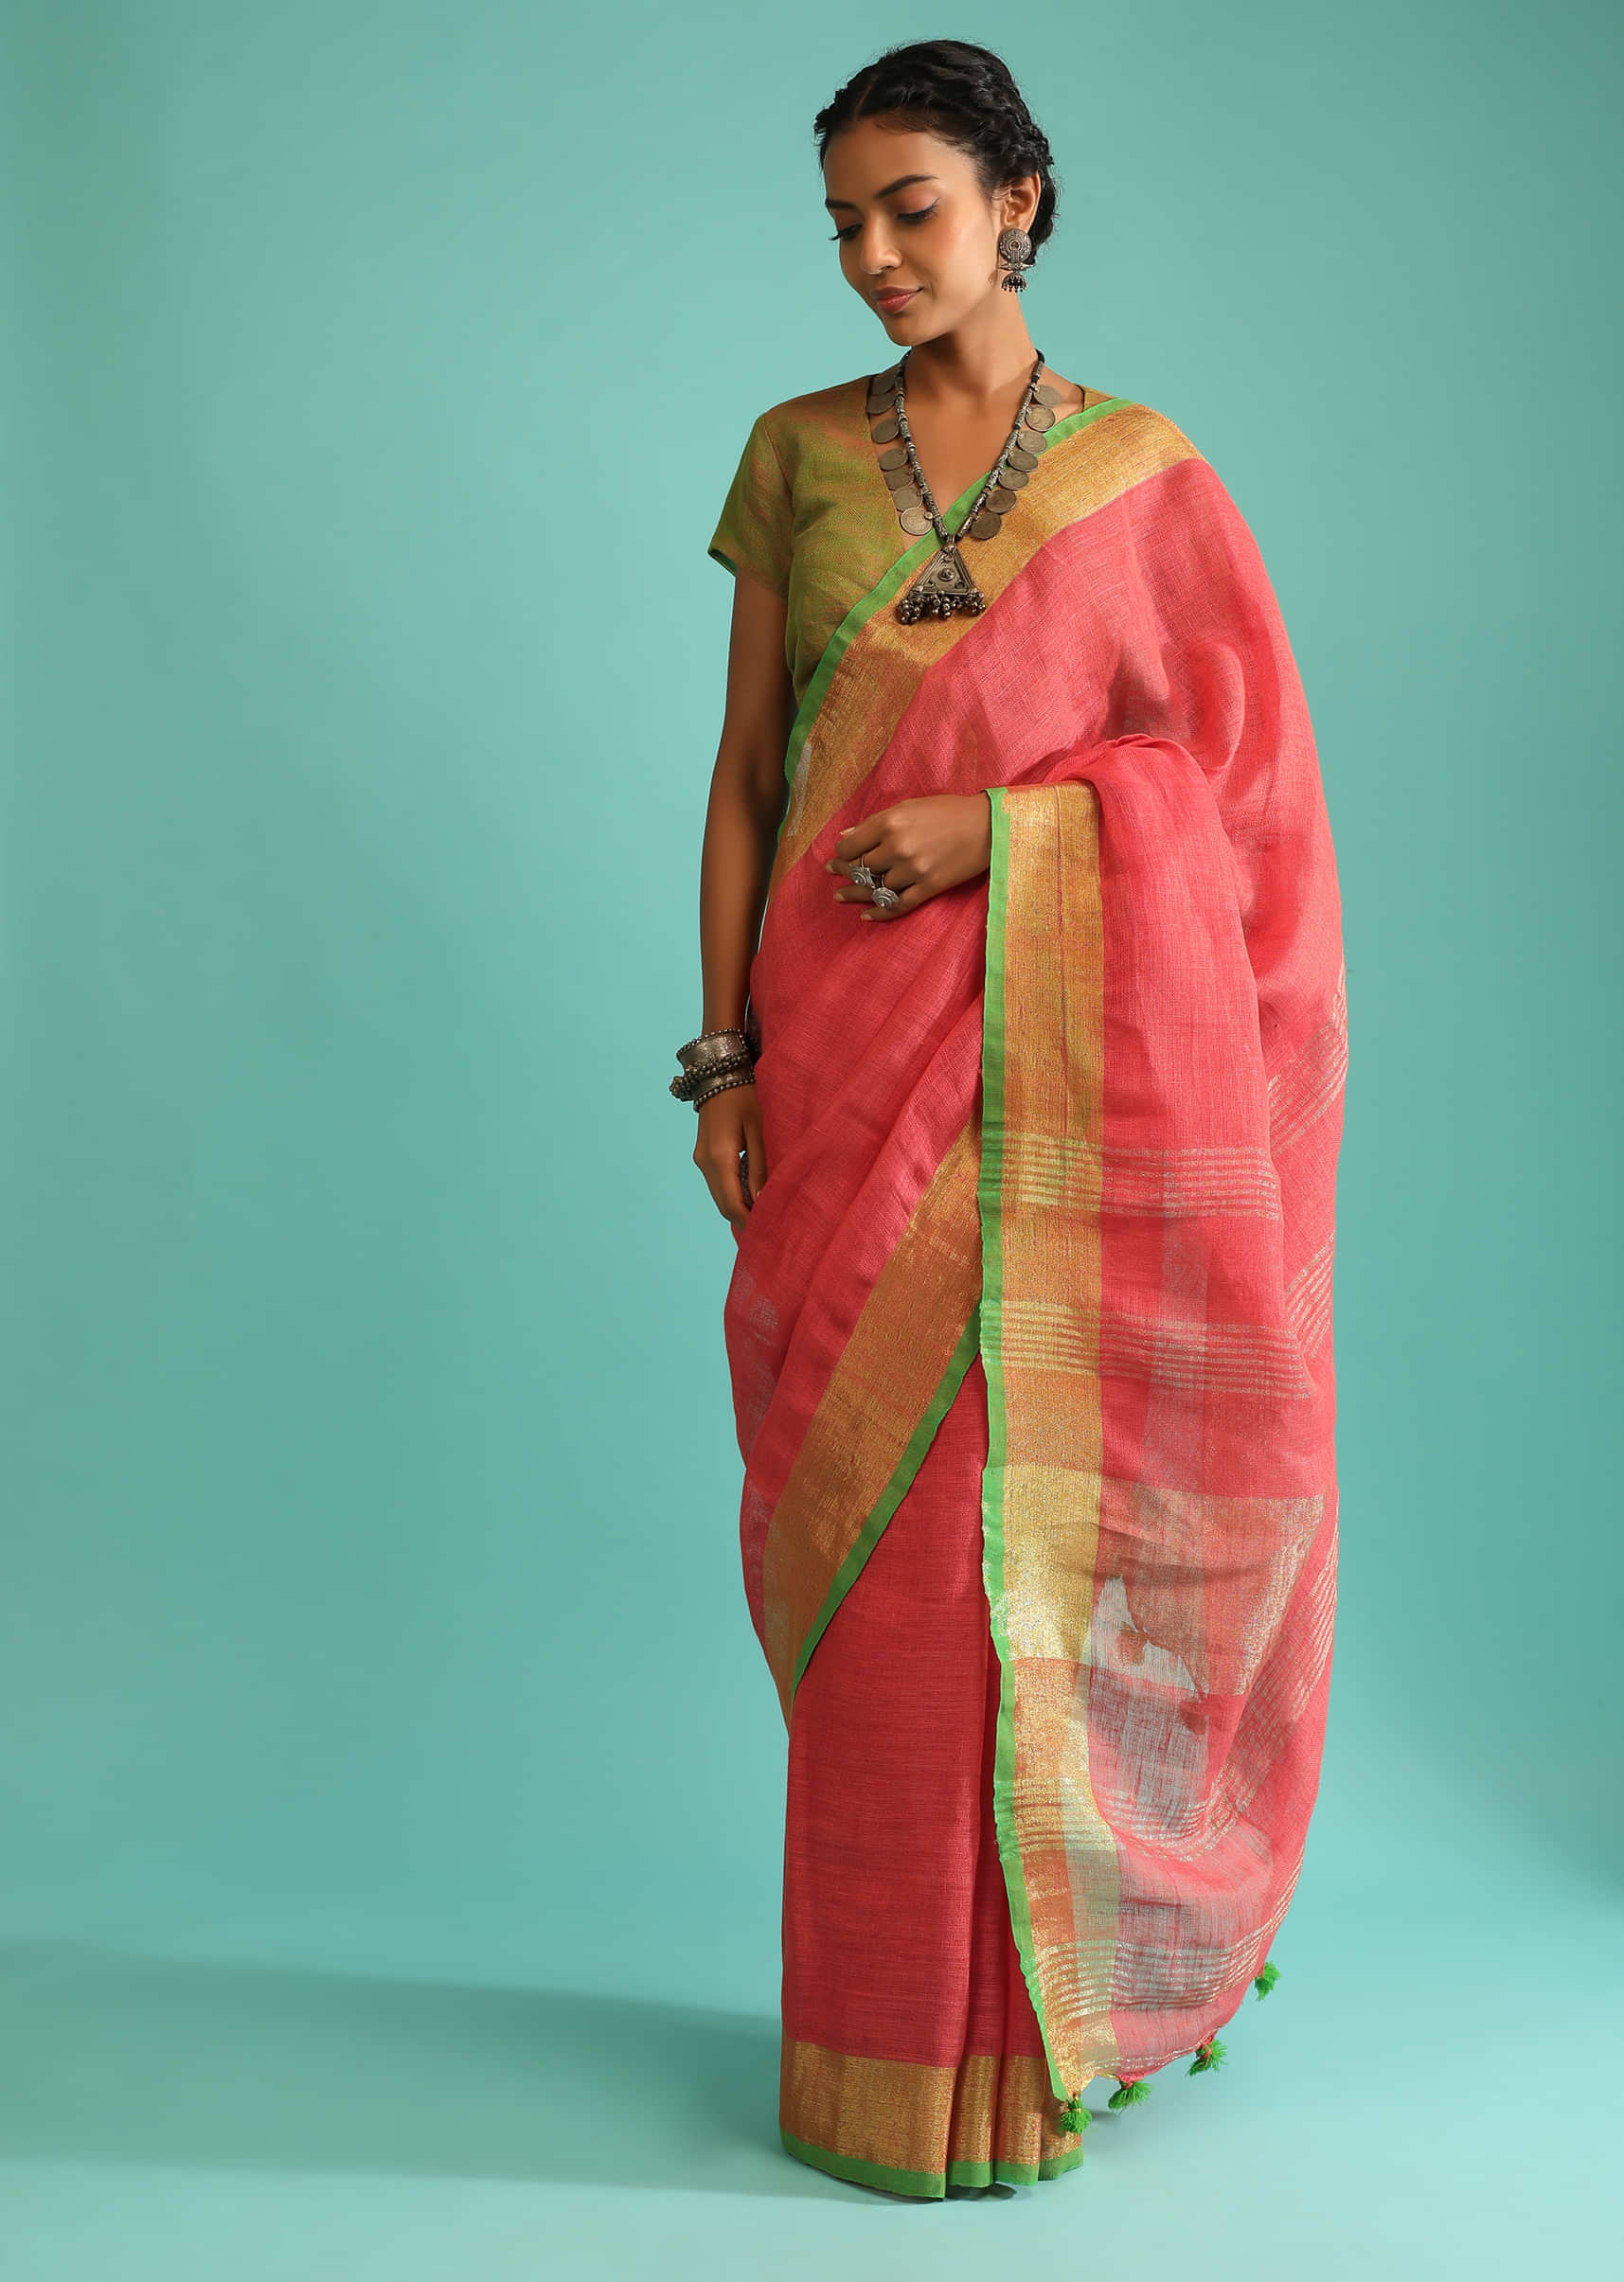 Coral Pink Saree In Linen With Golden Brocade Border And Striped Pallu